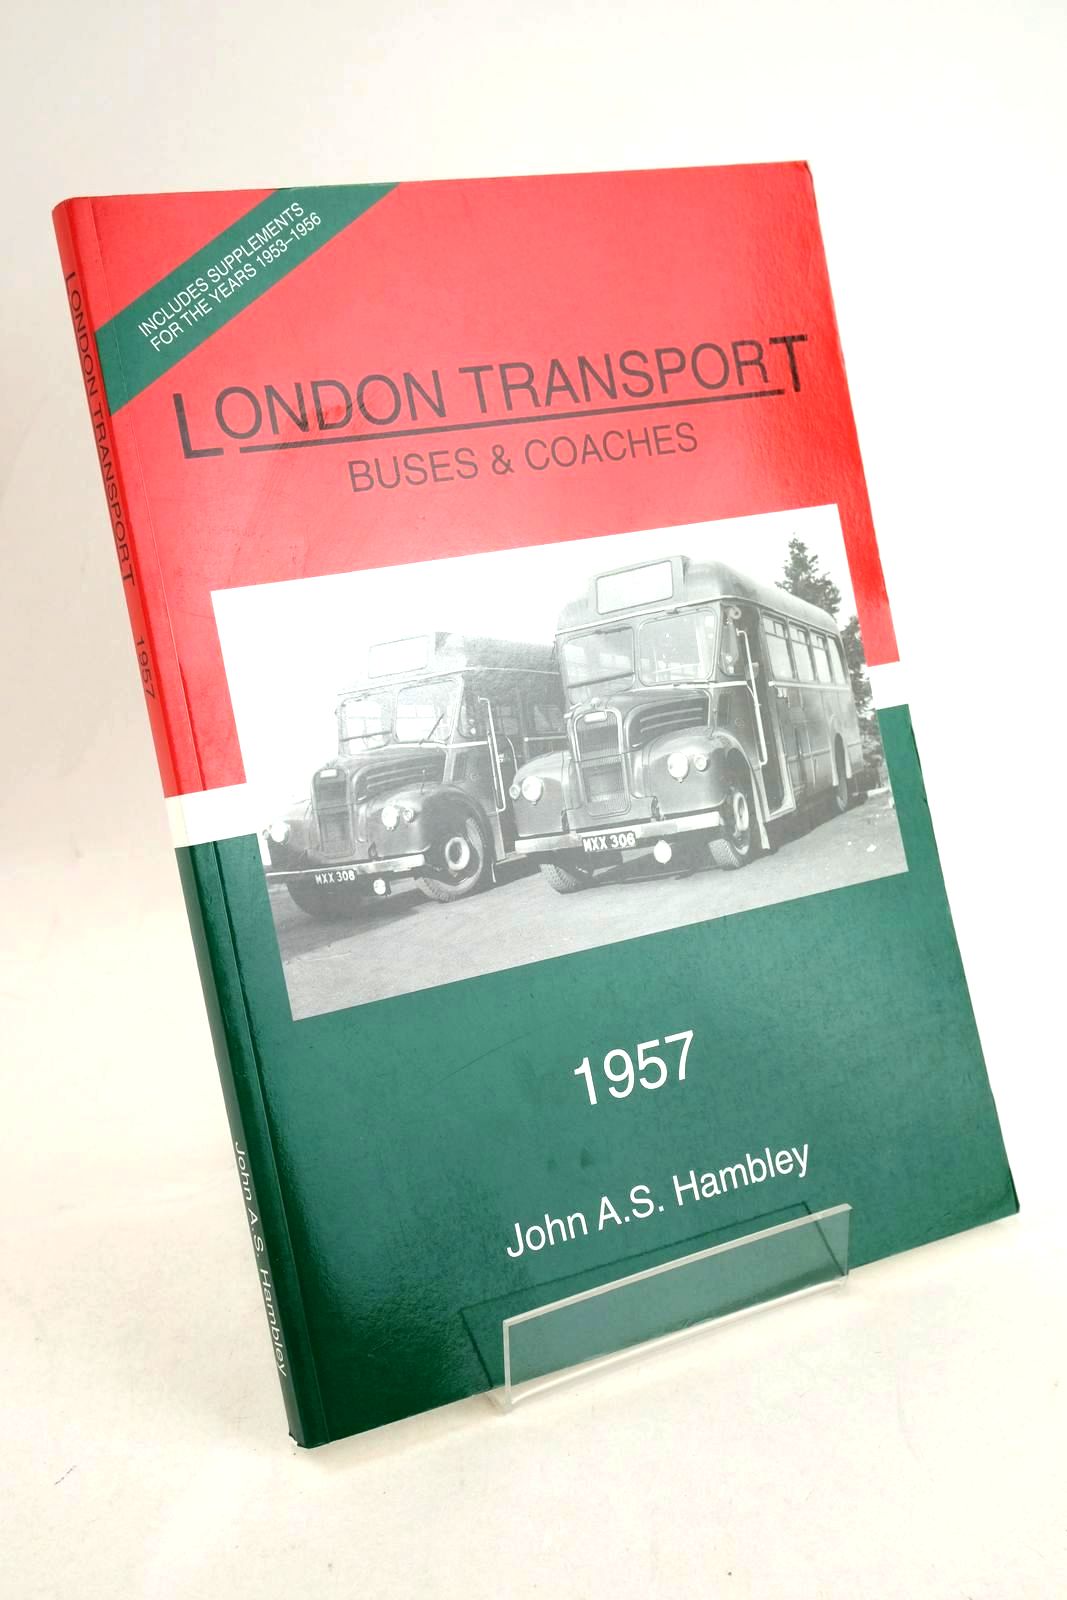 Photo of LONDON TRANSPORT BUSES & COACHES 1957 written by Hambley, John A.S. published by John A.S. Hambley (STOCK CODE: 1327376)  for sale by Stella & Rose's Books